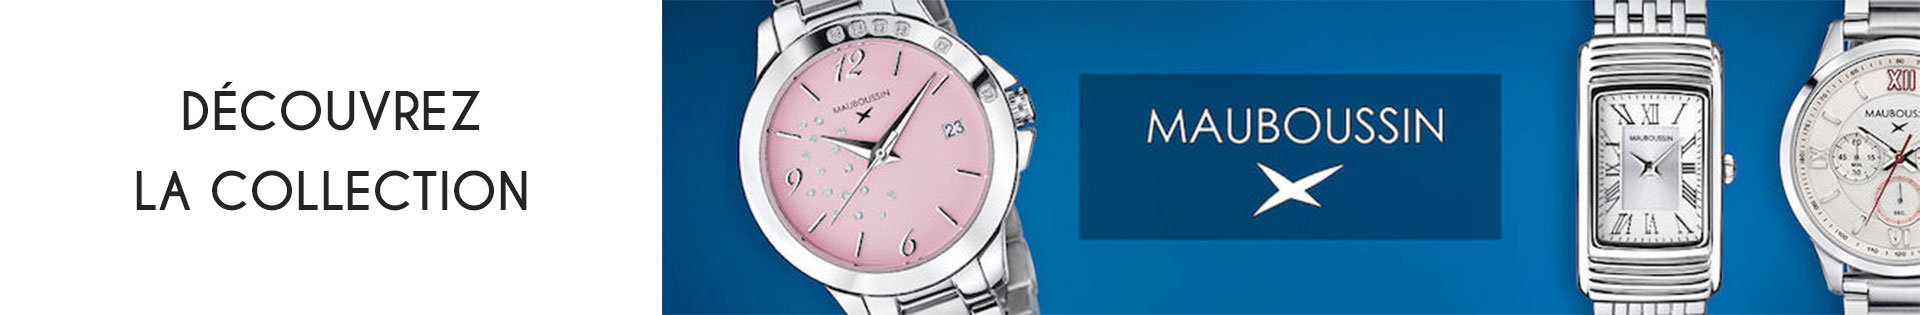 Montre - Or rose - Mauboussin Montres